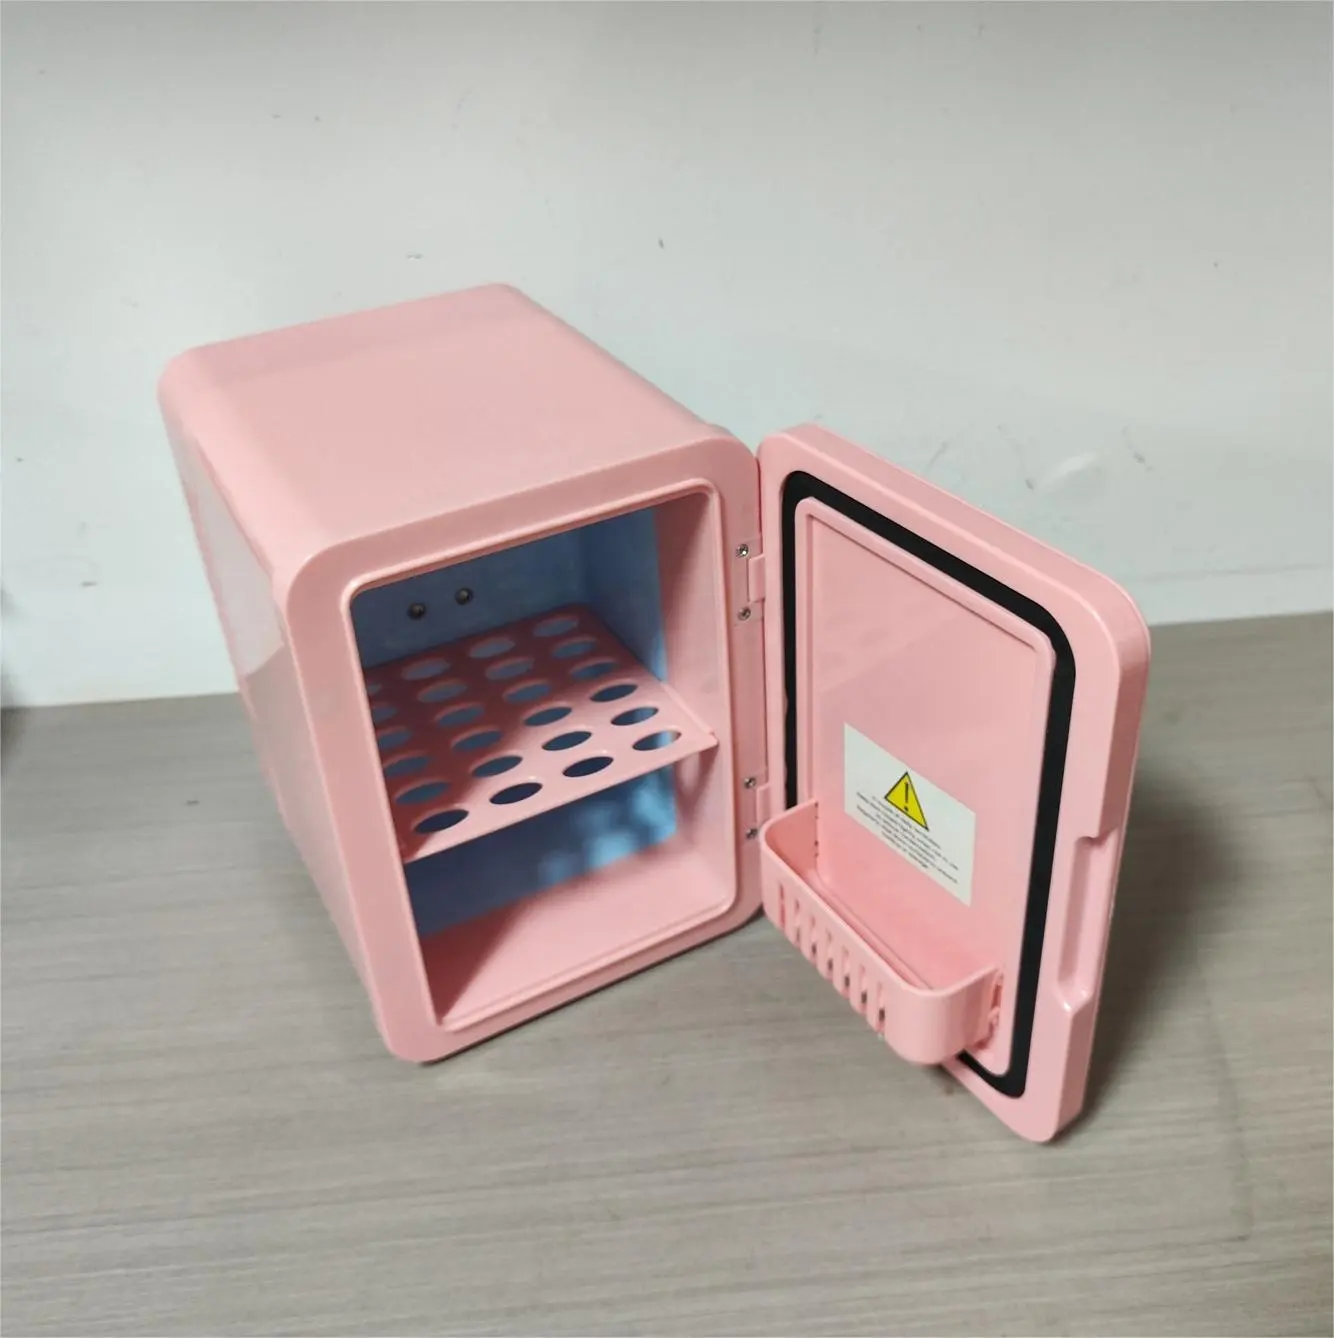 Mini Fridge for Bedroom Car, Office Portable 4L/6 Can Cooler & Warmer for Food, Drinks, Skincare Beauty Makeup AC/DC,USB, Pink